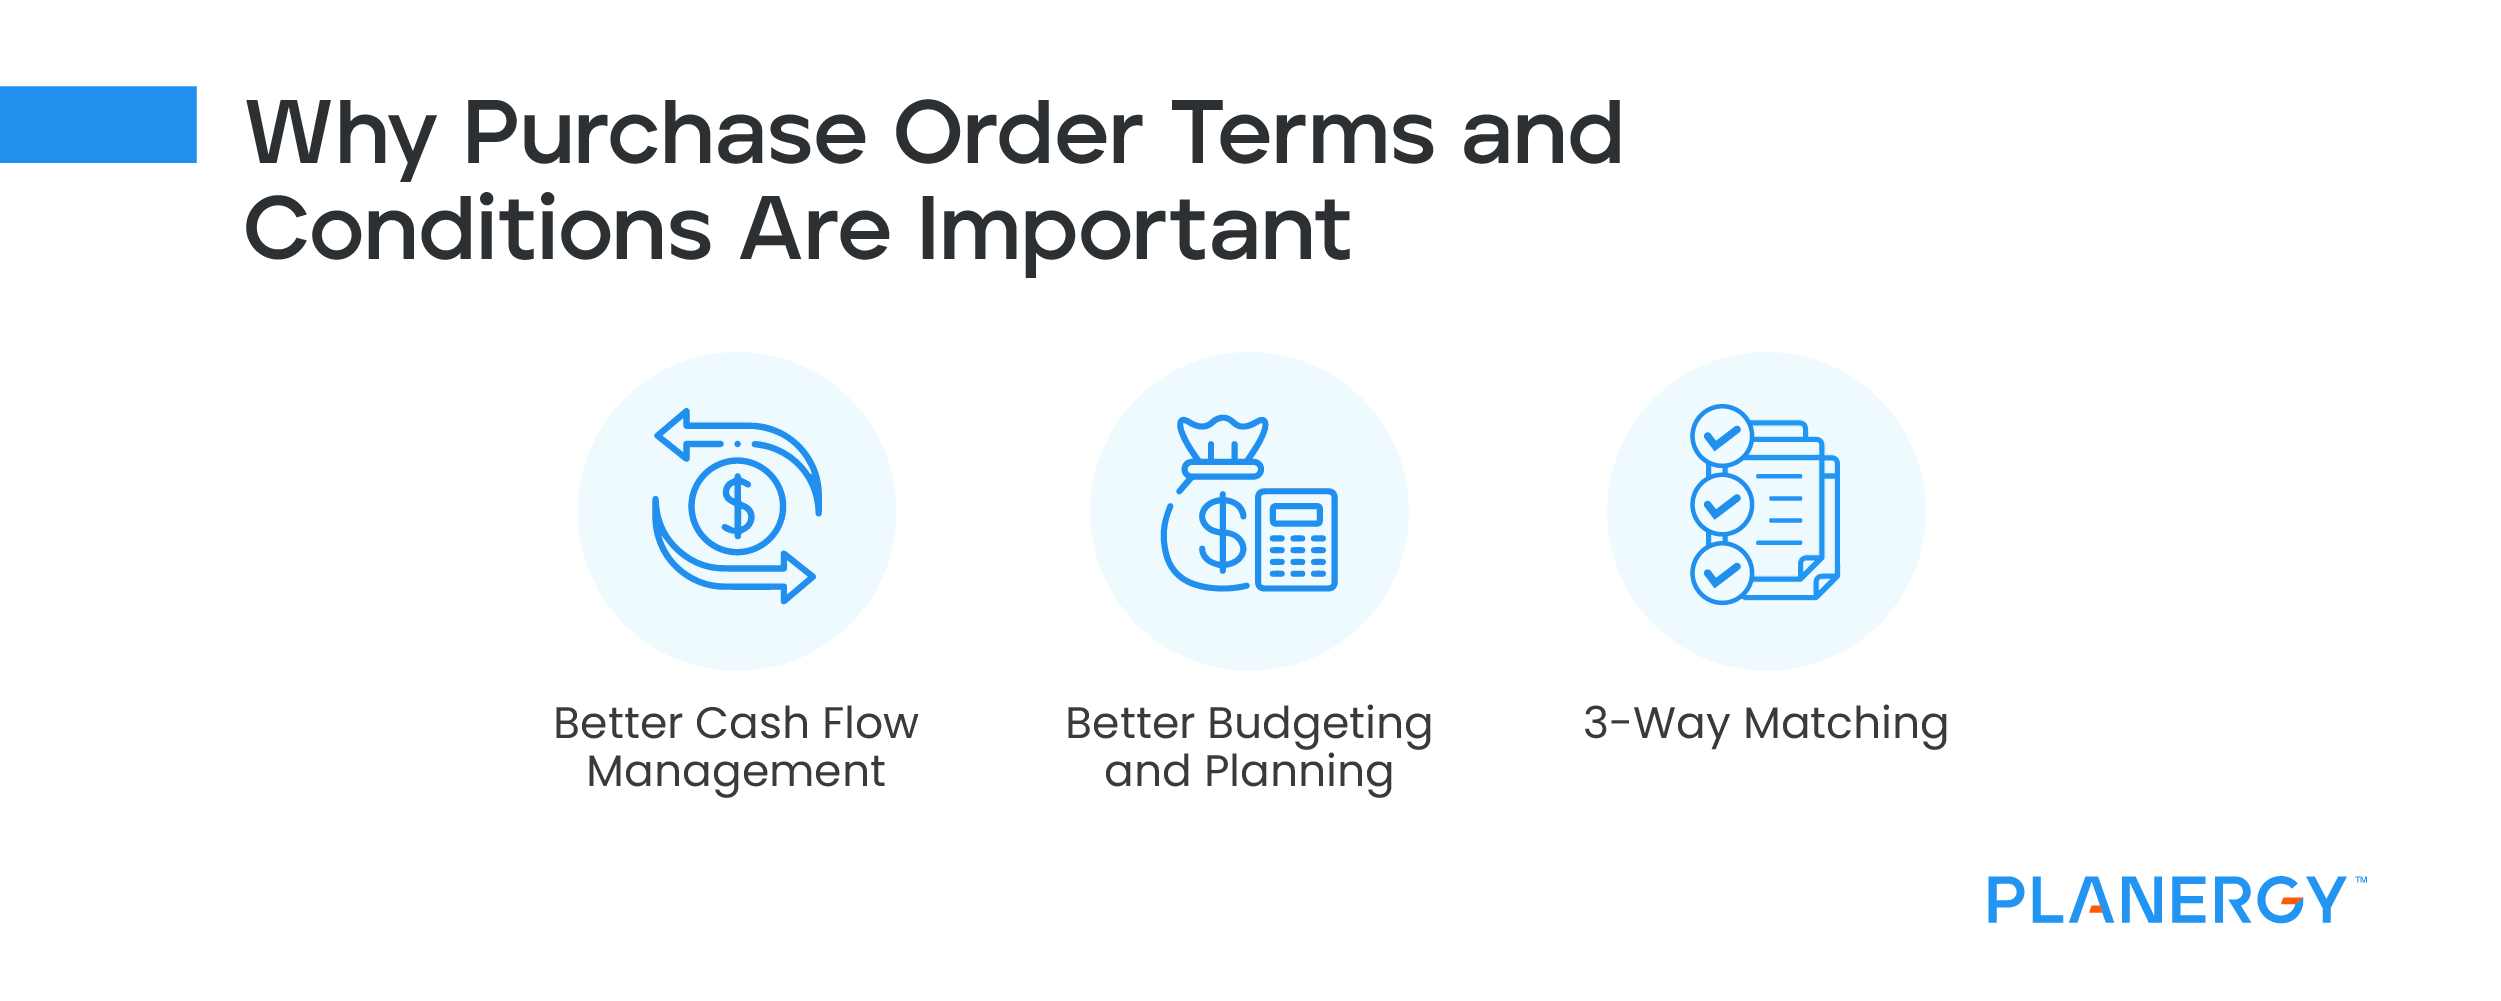 Why Purchase Order Terms and Conditions Are Important